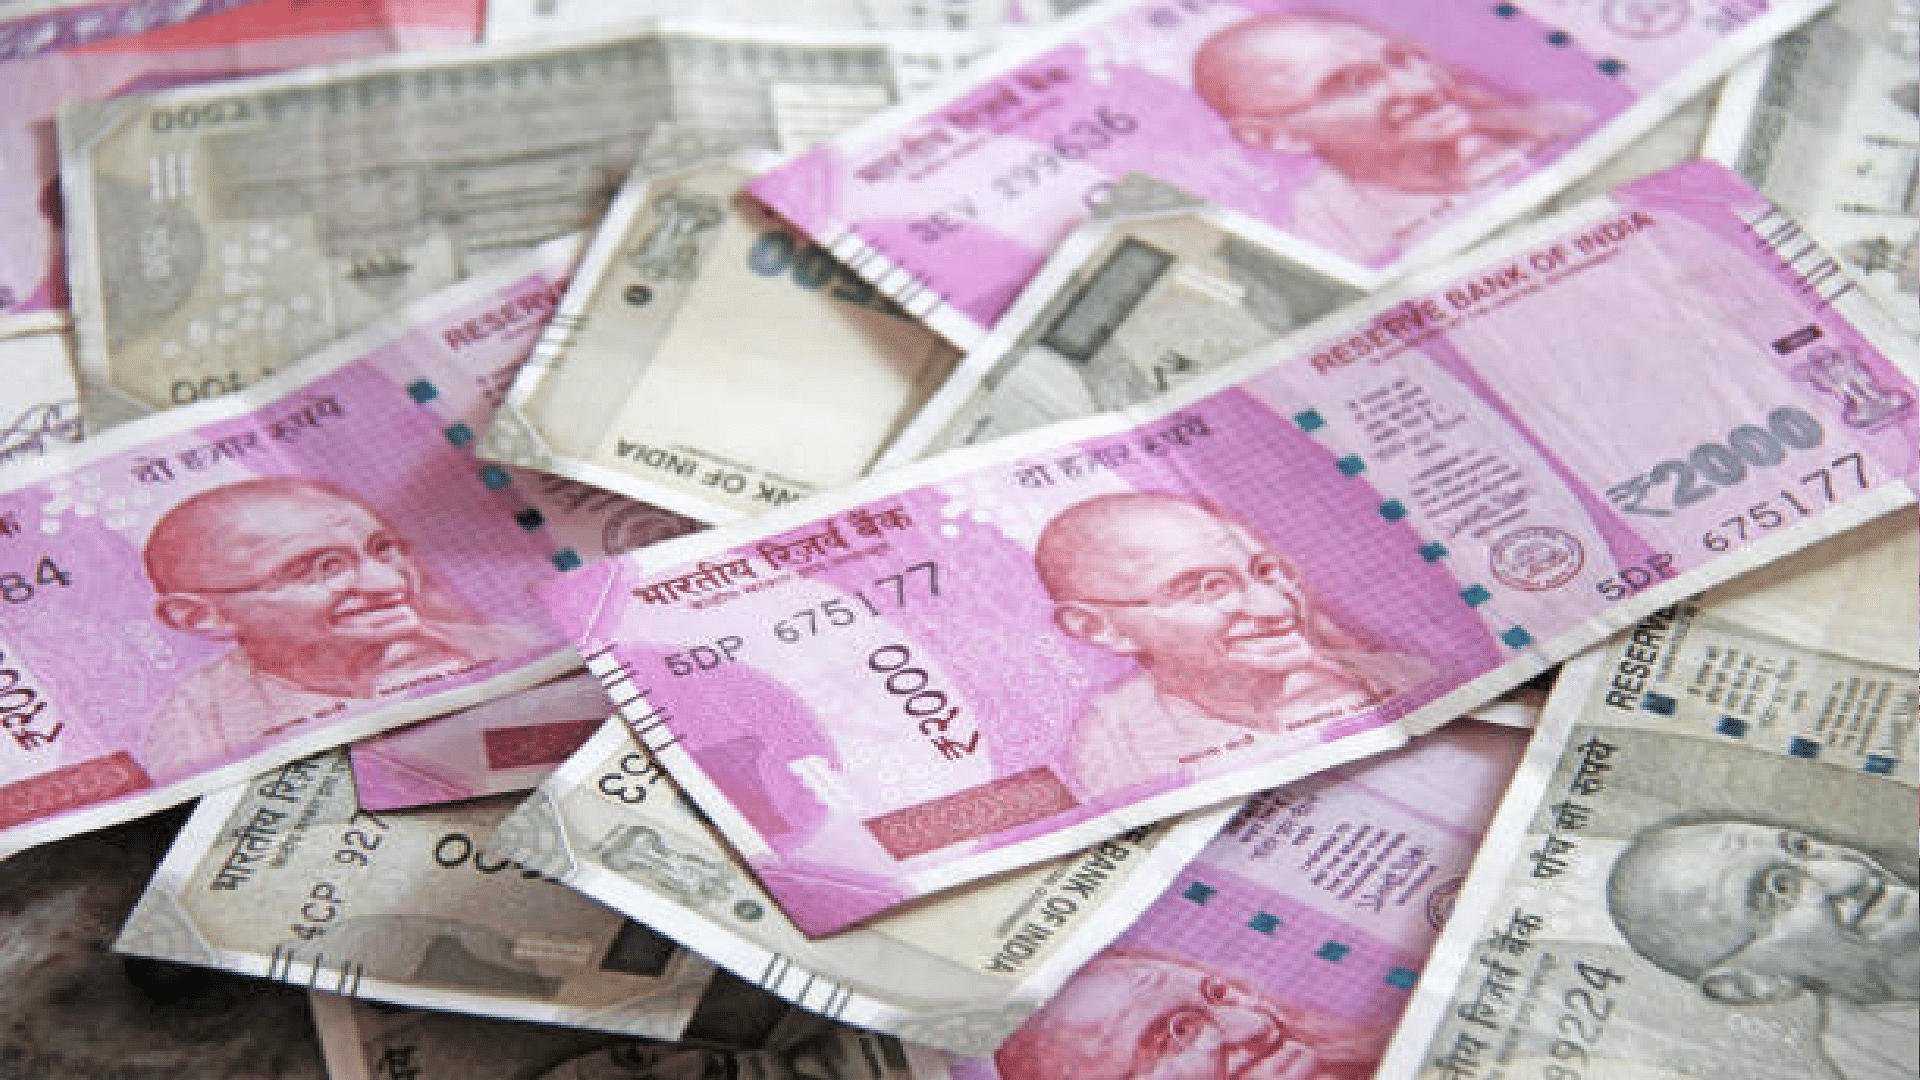 Chinese Woman Earned RS 155 Crore In One Week From Three Second Sales Promotion Tactic